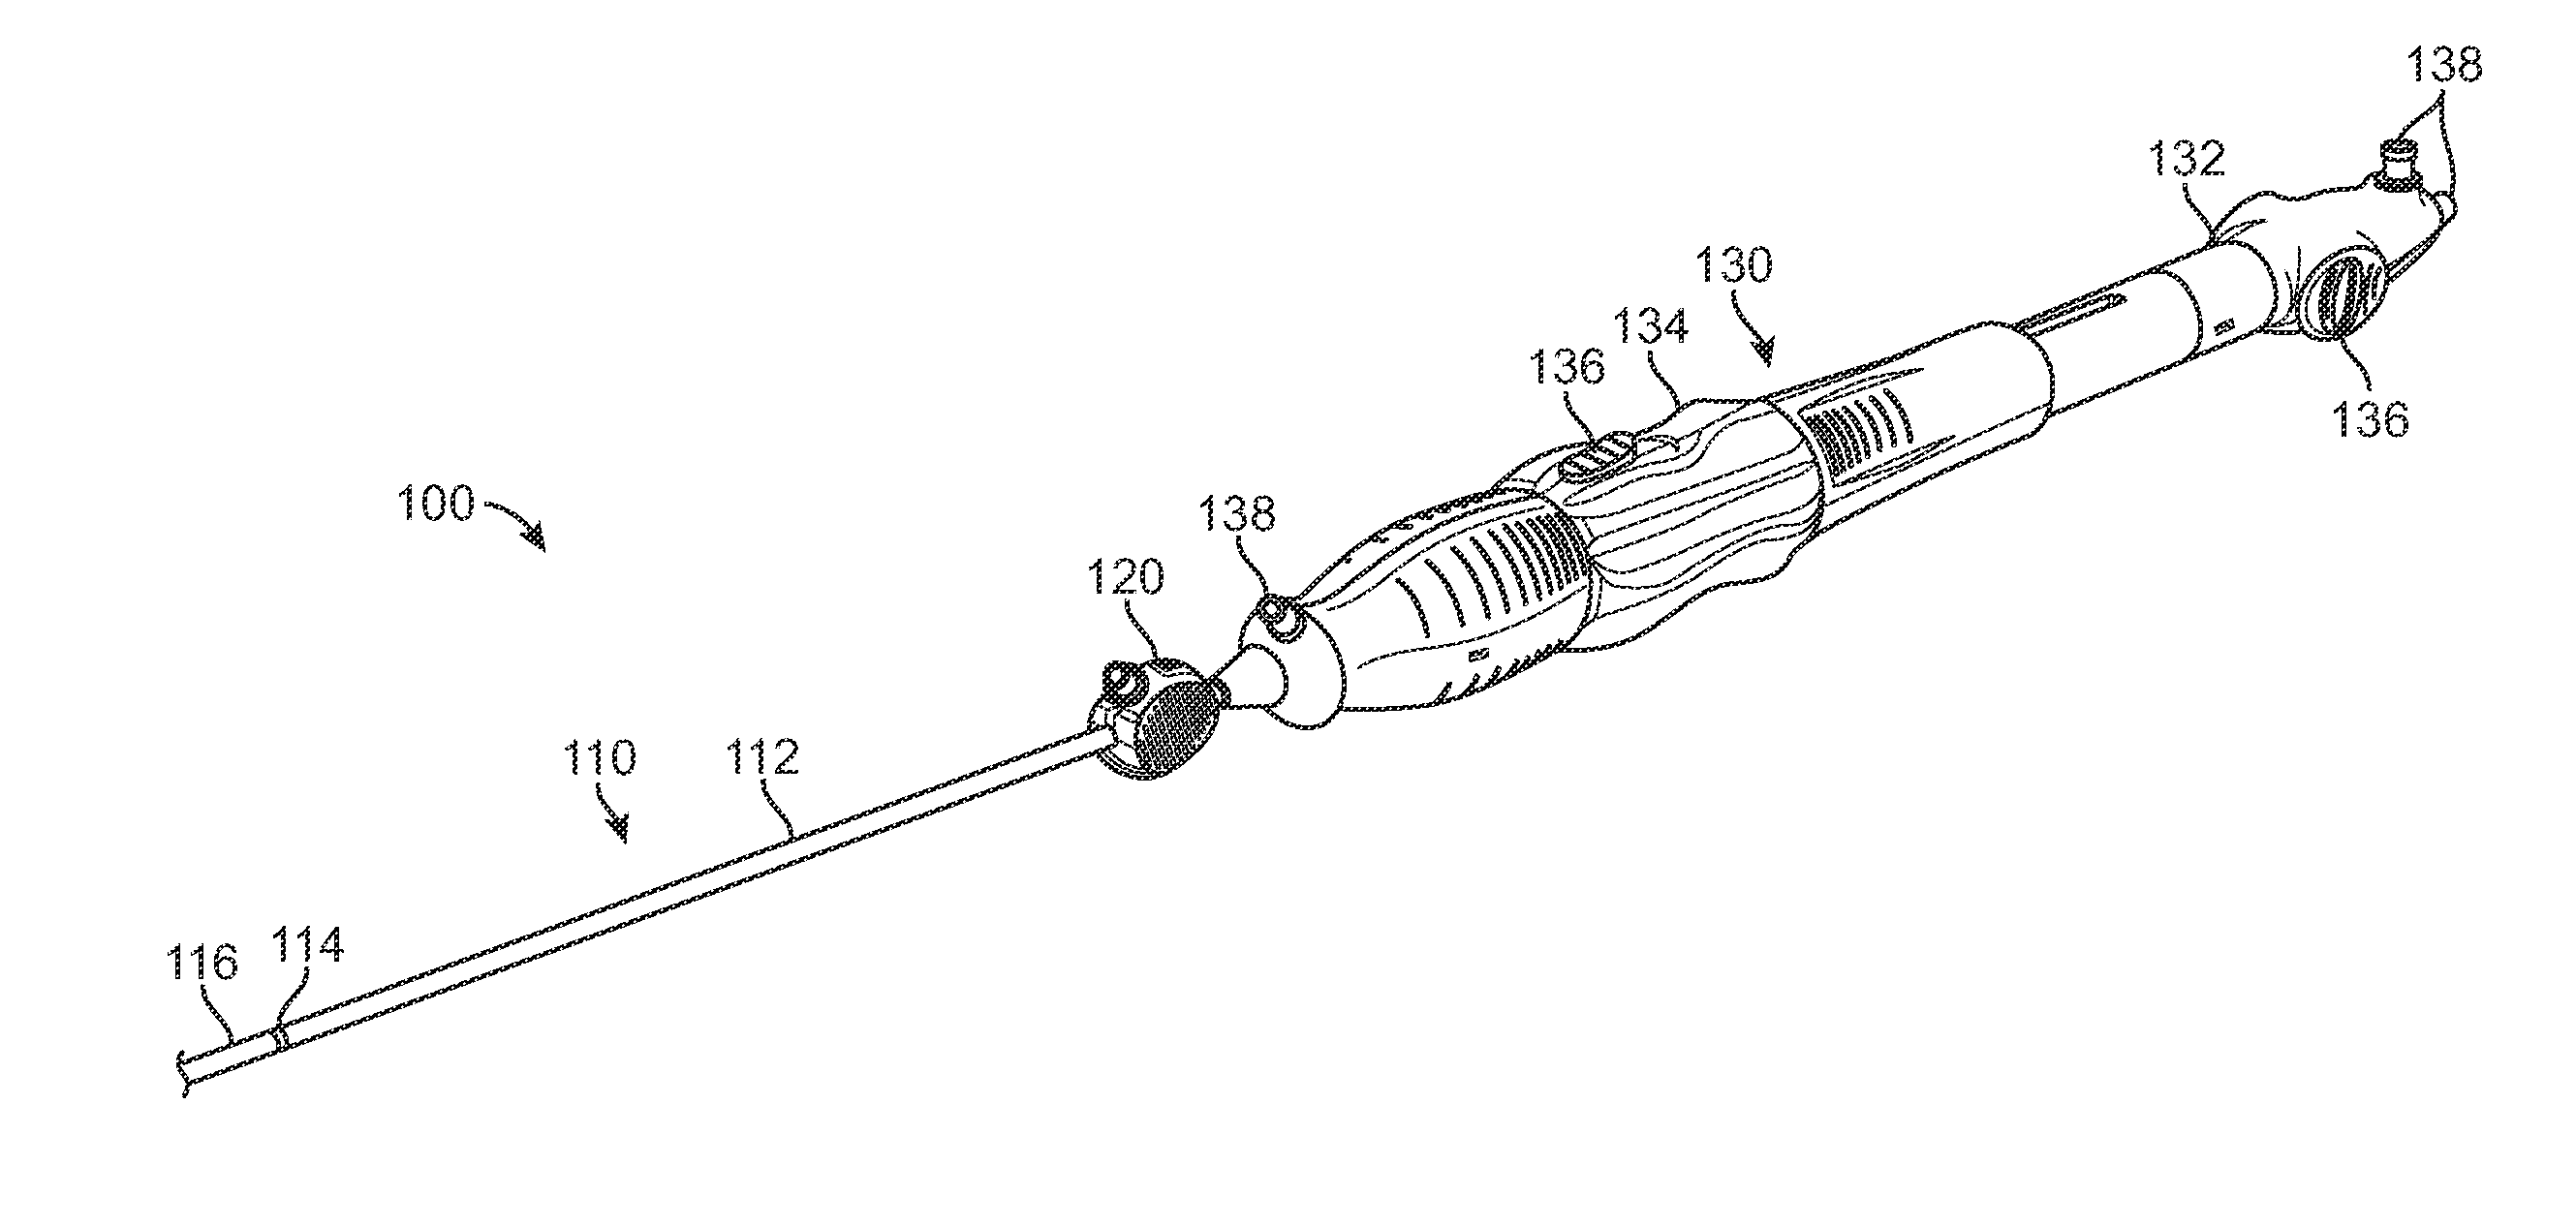 Delivery System with Inline Sheath